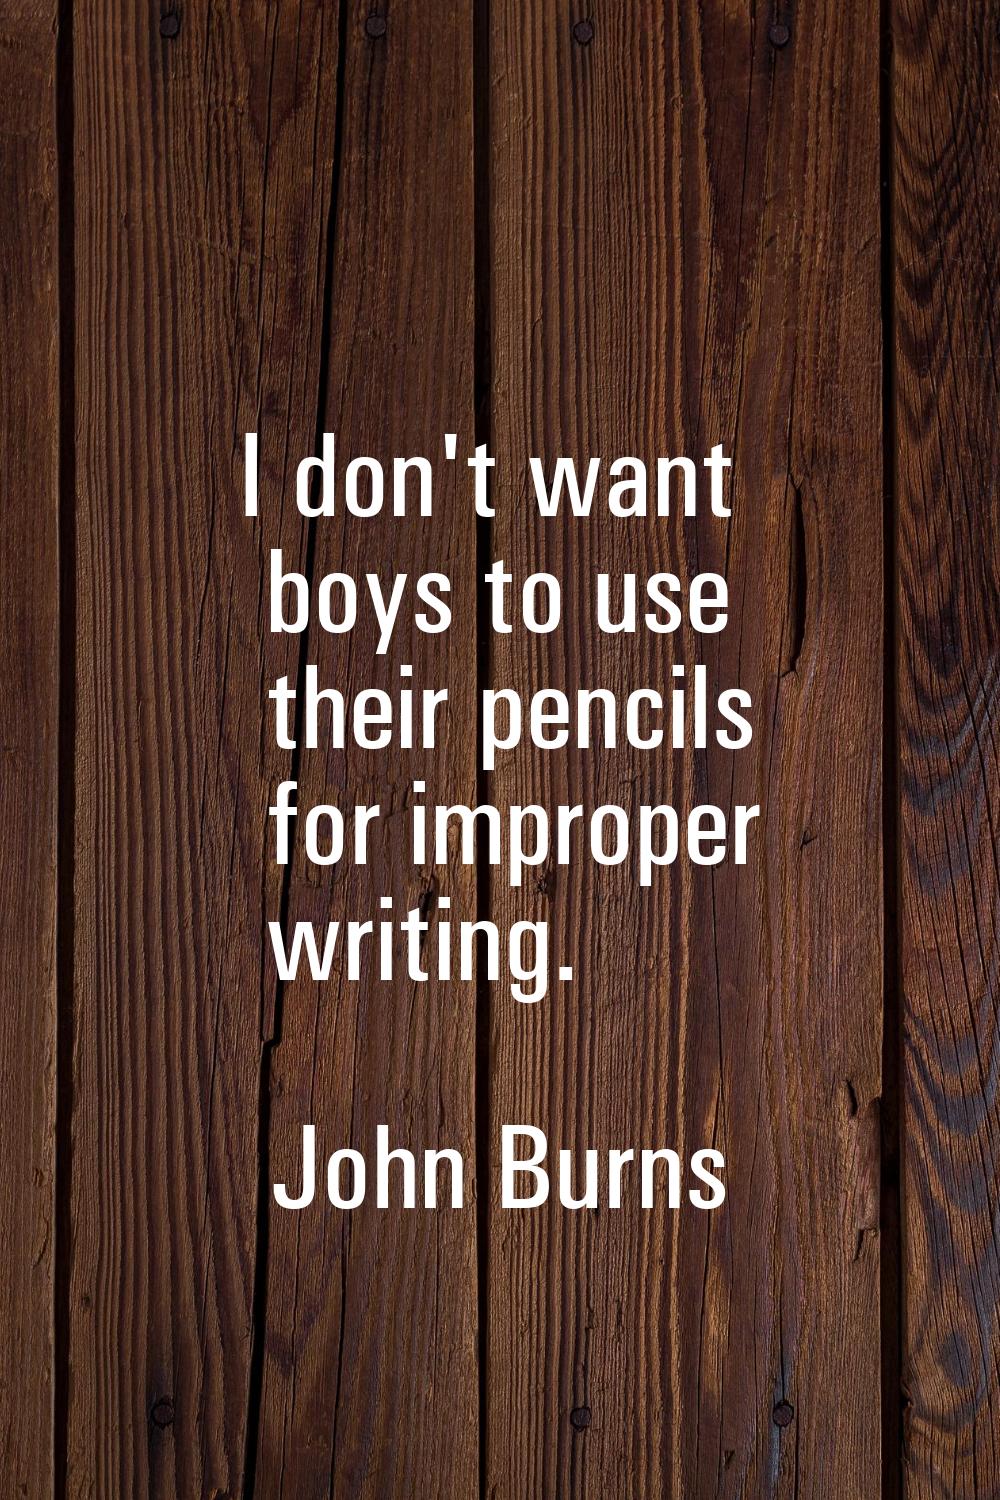 I don't want boys to use their pencils for improper writing.